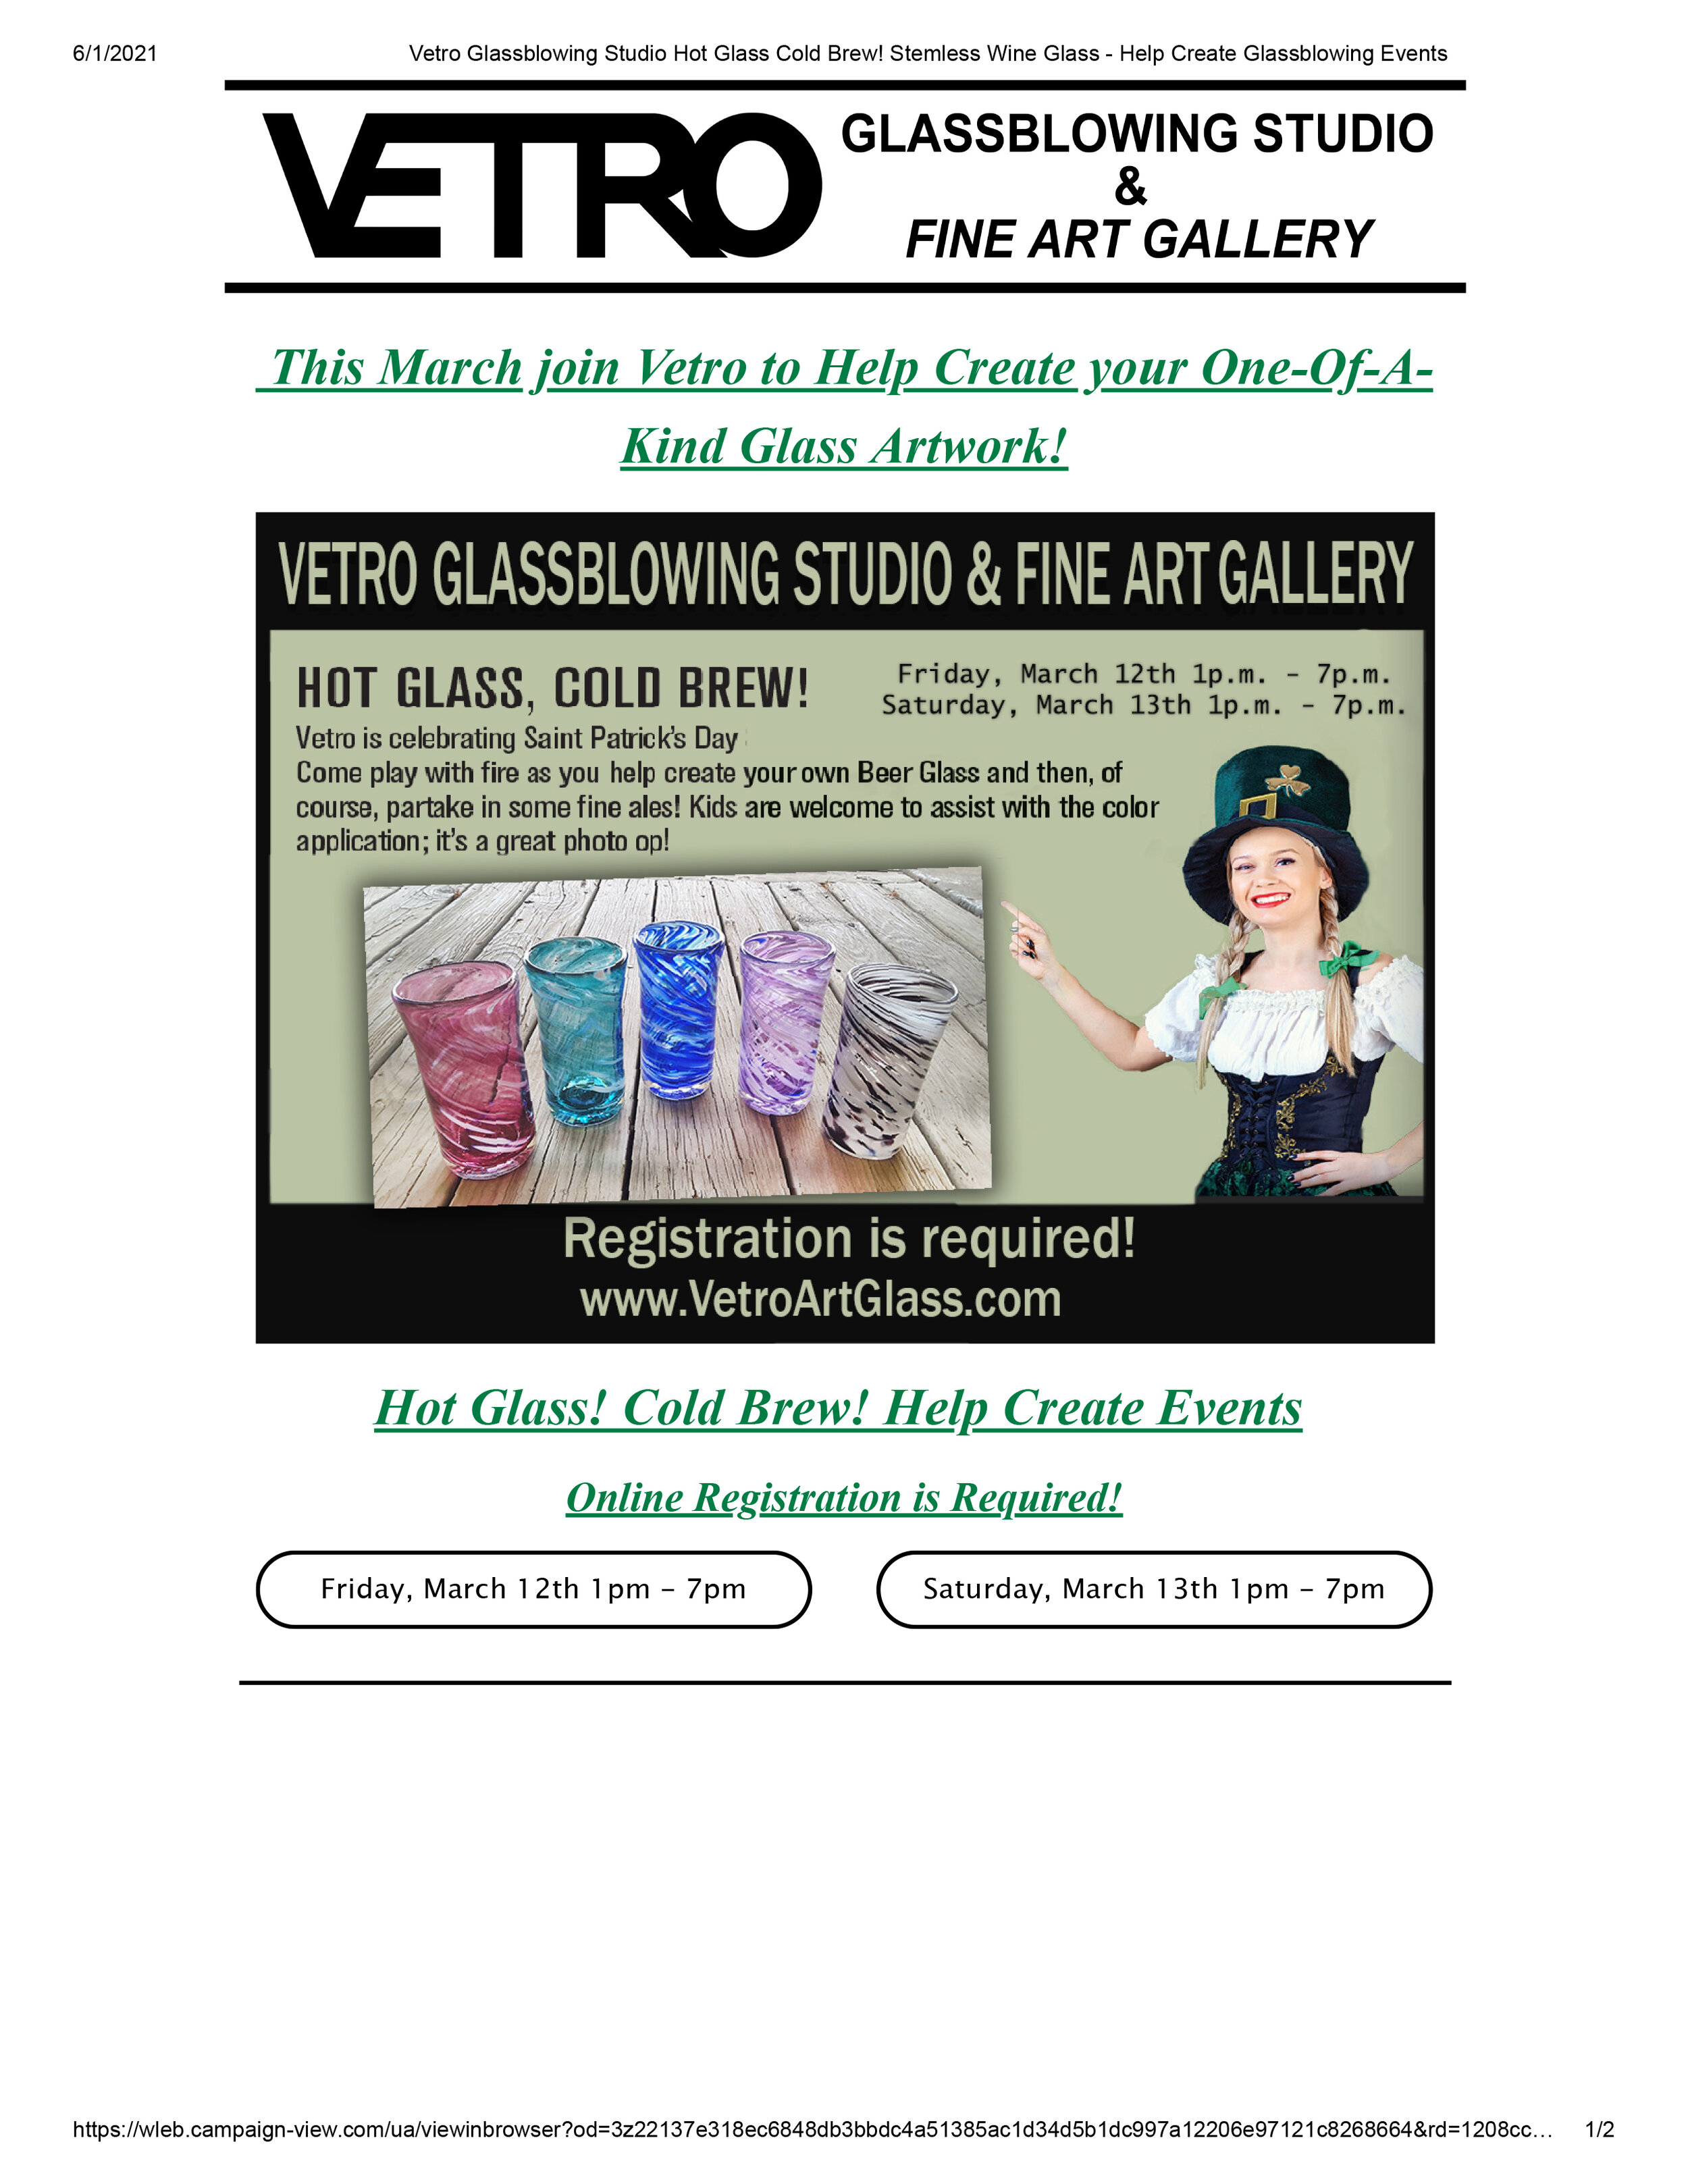 Email Campaigns -Vetro Glassblowing Studio - This March join Vetro to Help Create your One-Of-A-Kind Glass Artwork!-1.jpg